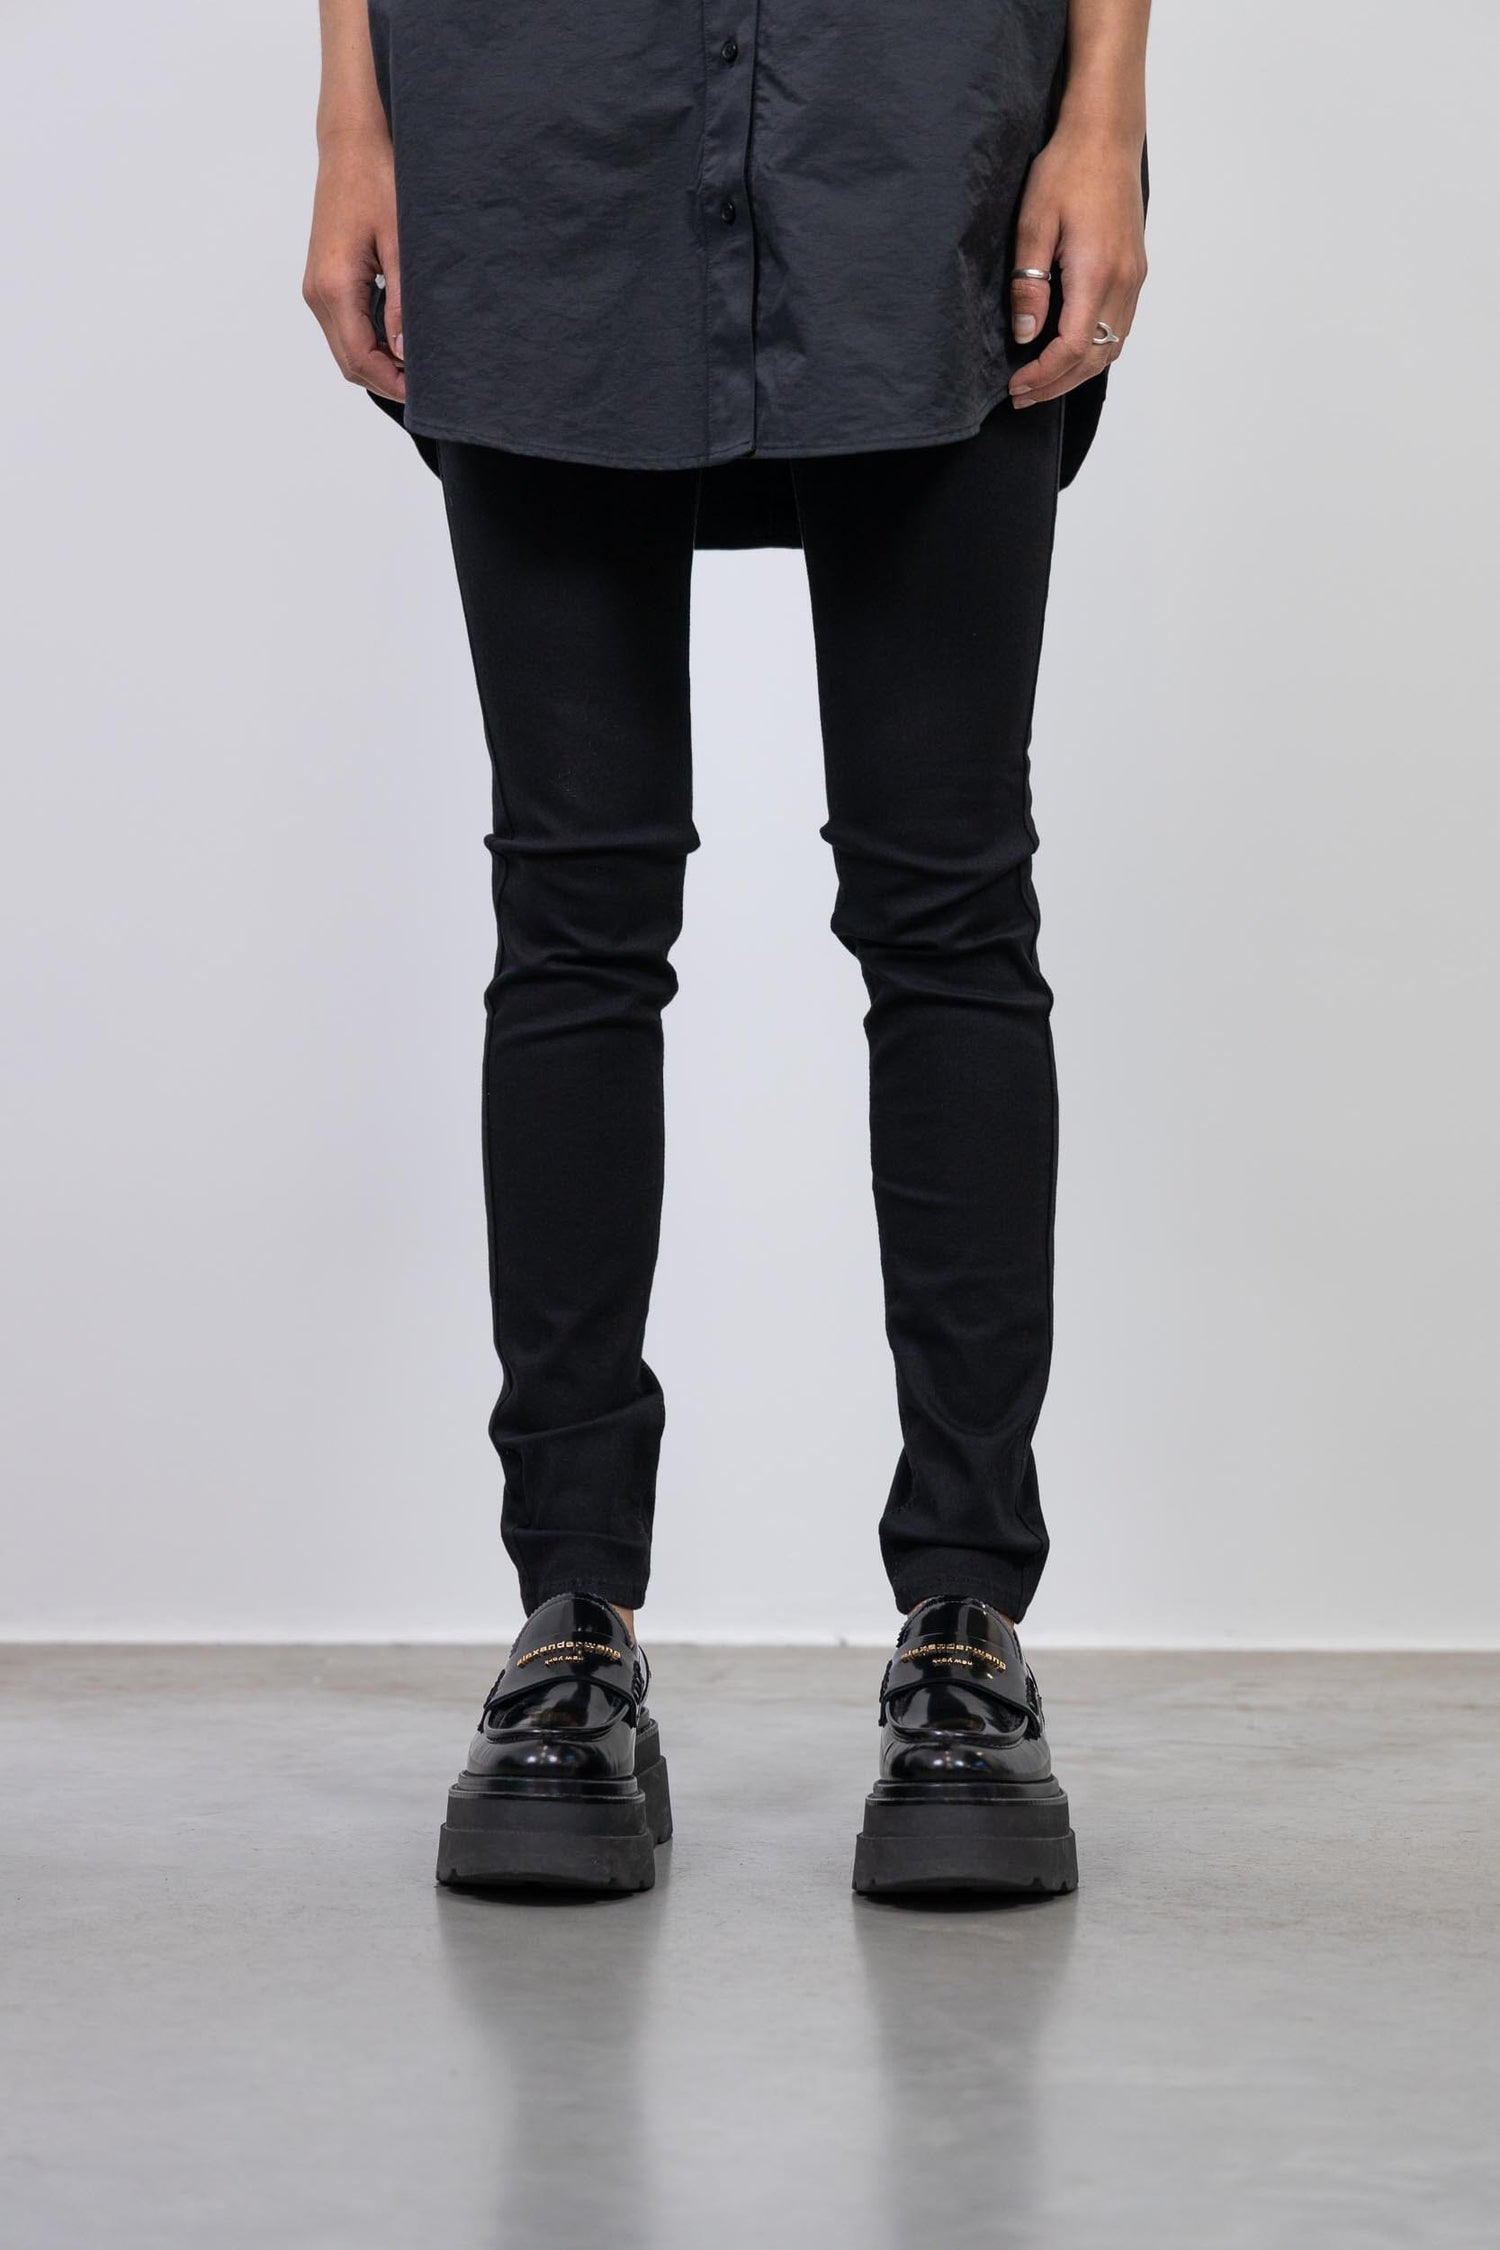 721 HIGH RISE LONG SKINNY JEANS JEANS LEVIS 